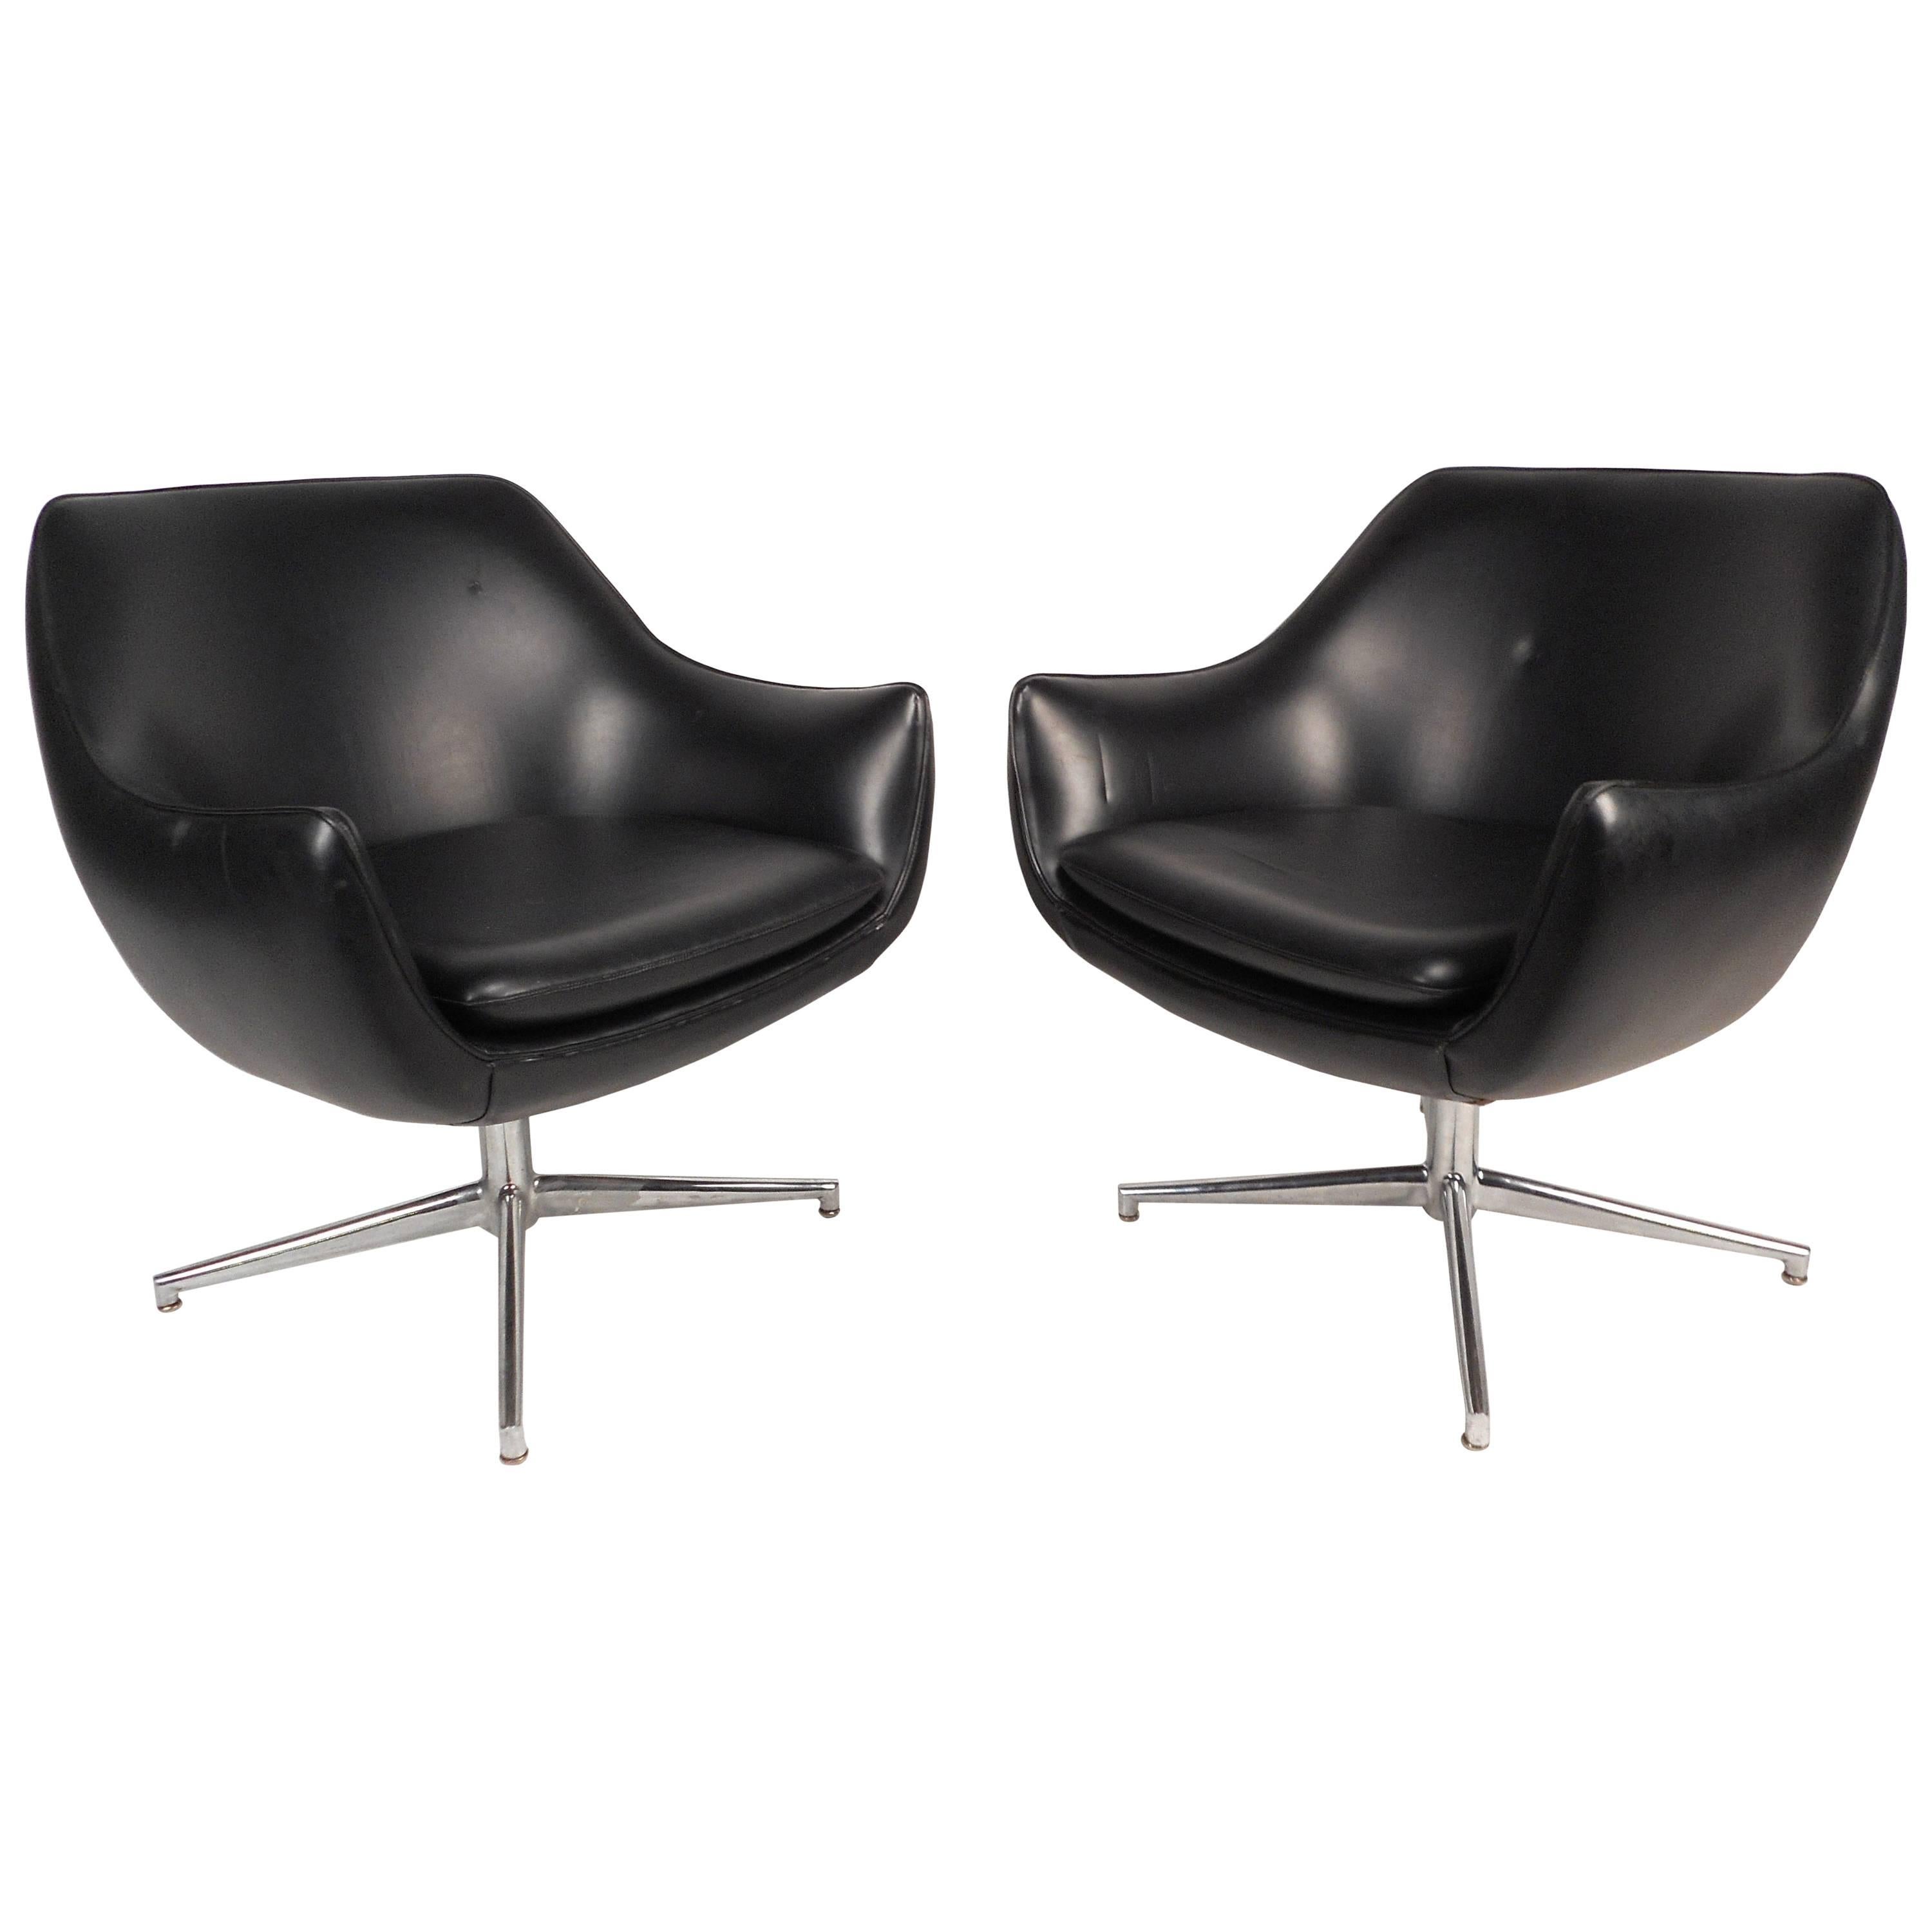 Pair of Mid-Century Modern Bubble Chairs by Stow Davis